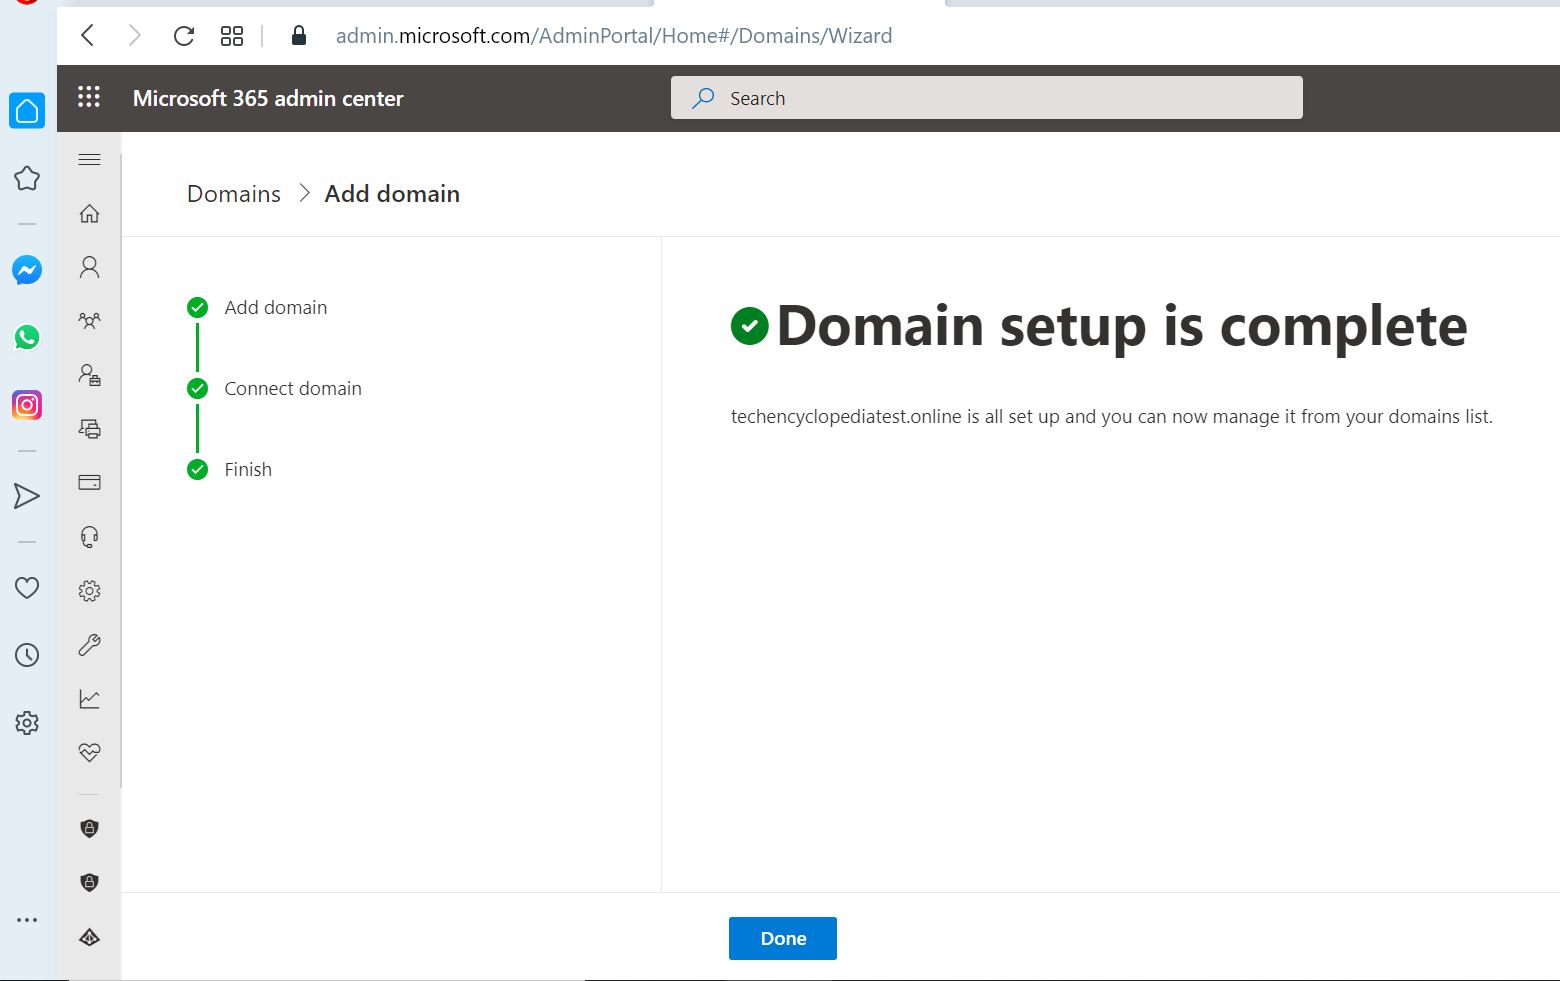 DOMAIN 8 add domain to 365